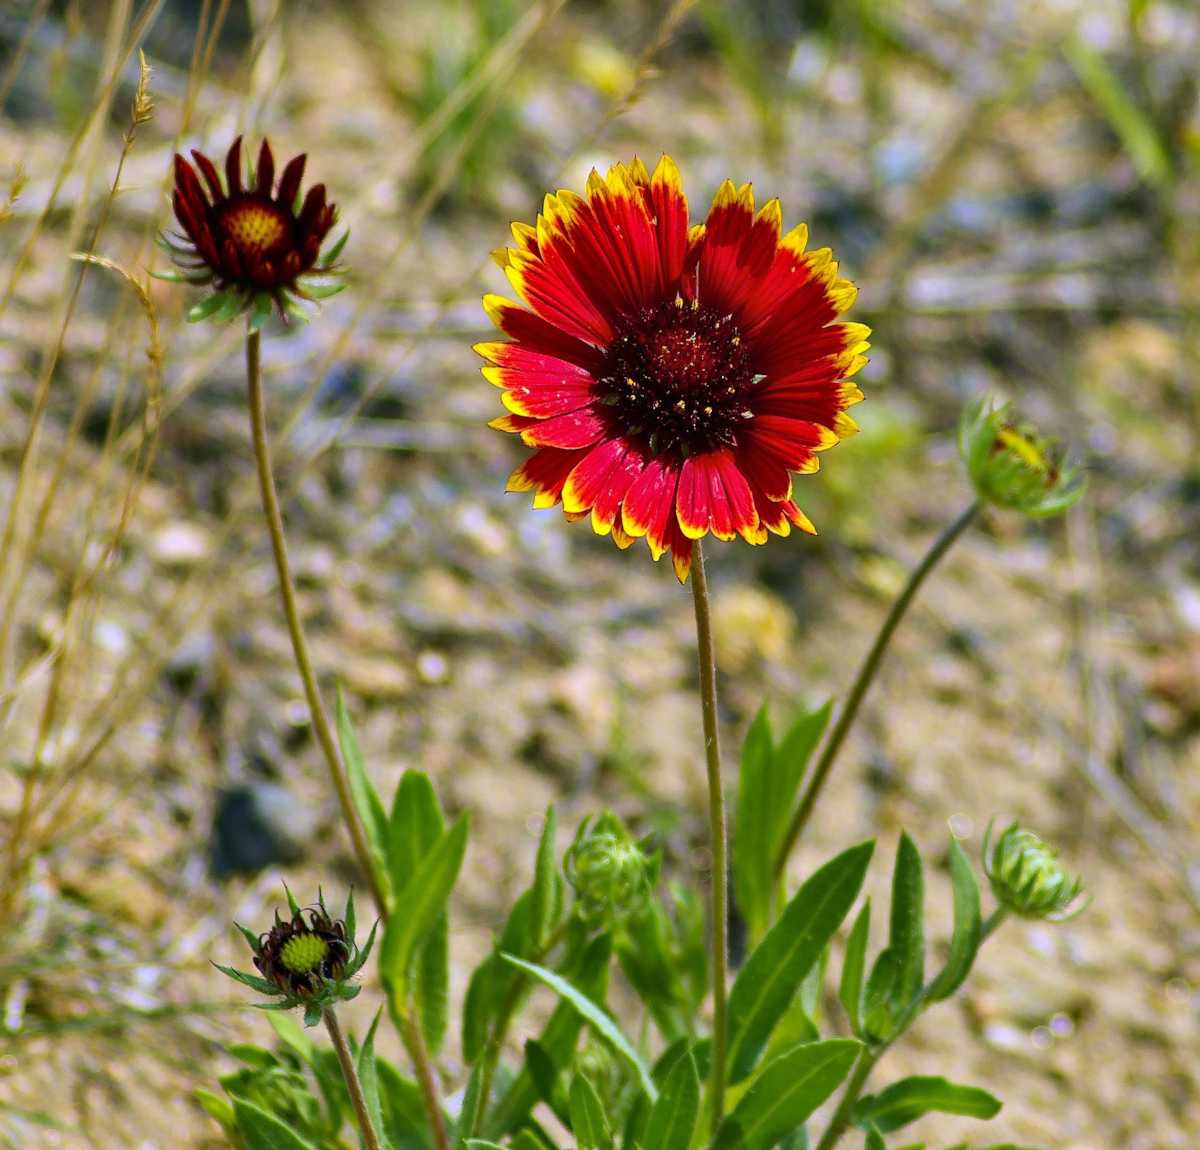 gaillardia - planting, sowing and advice on caring for it